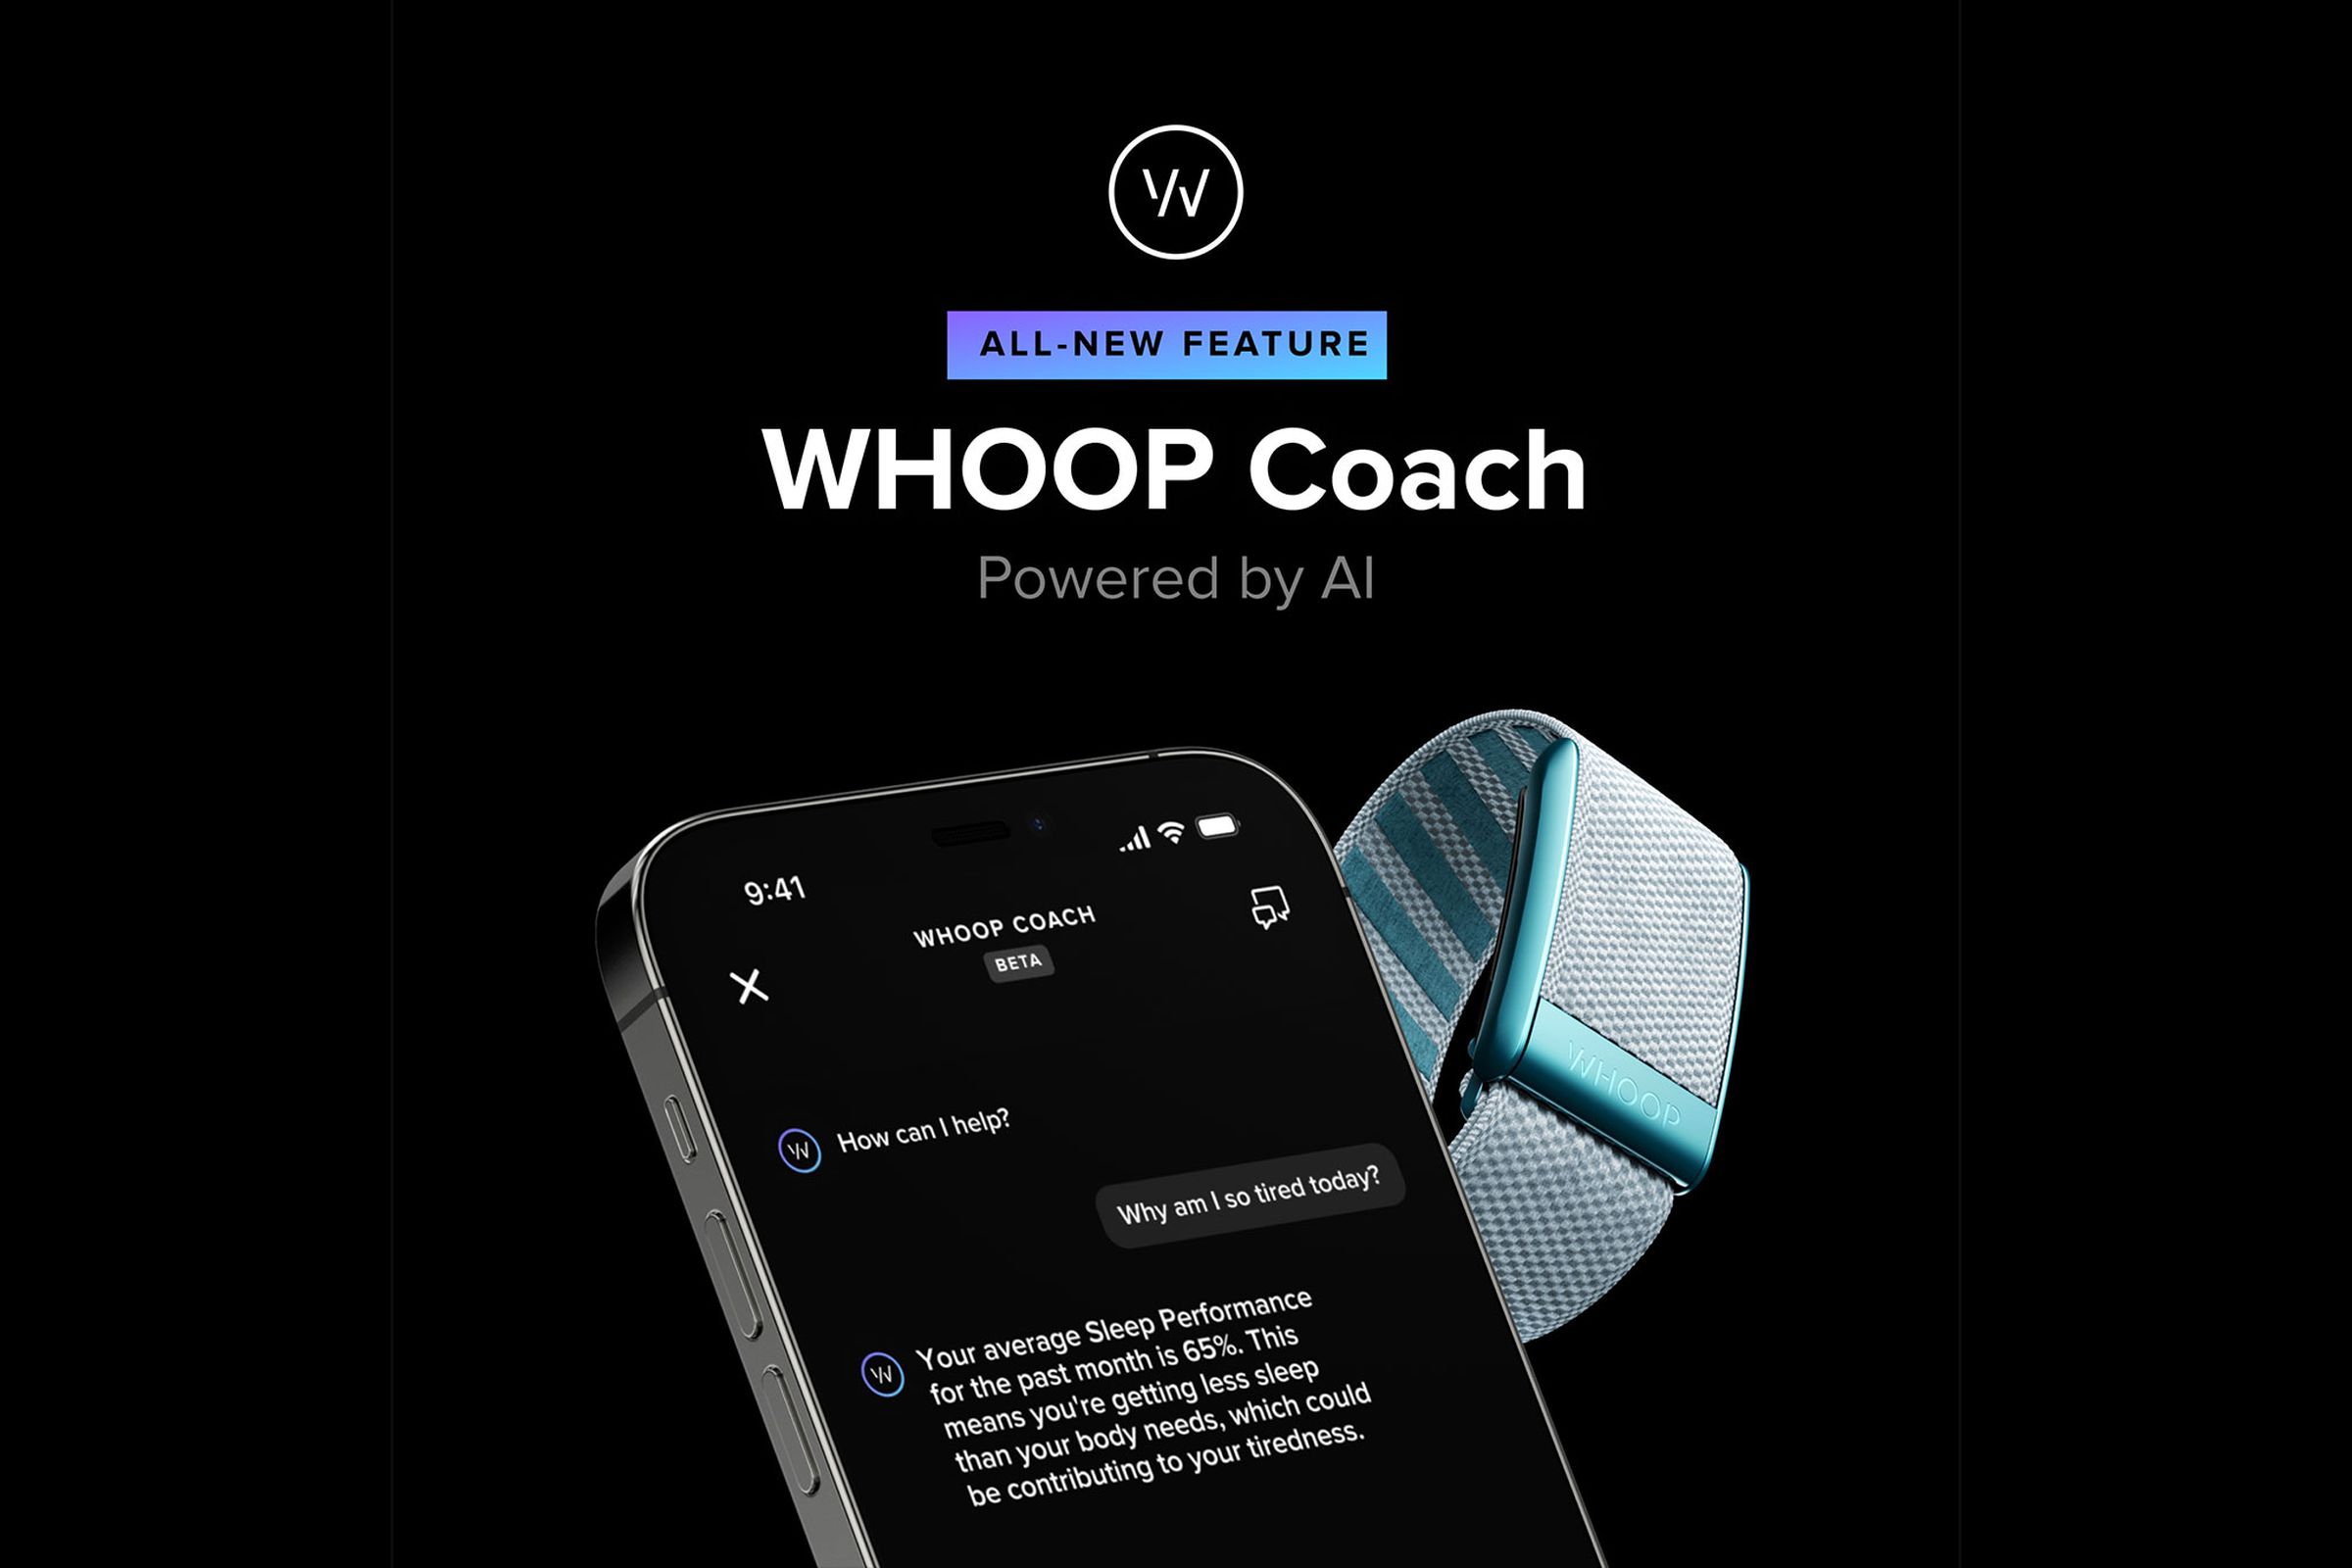 Render of Whoop Coach and Whoop band introducing the new feature.